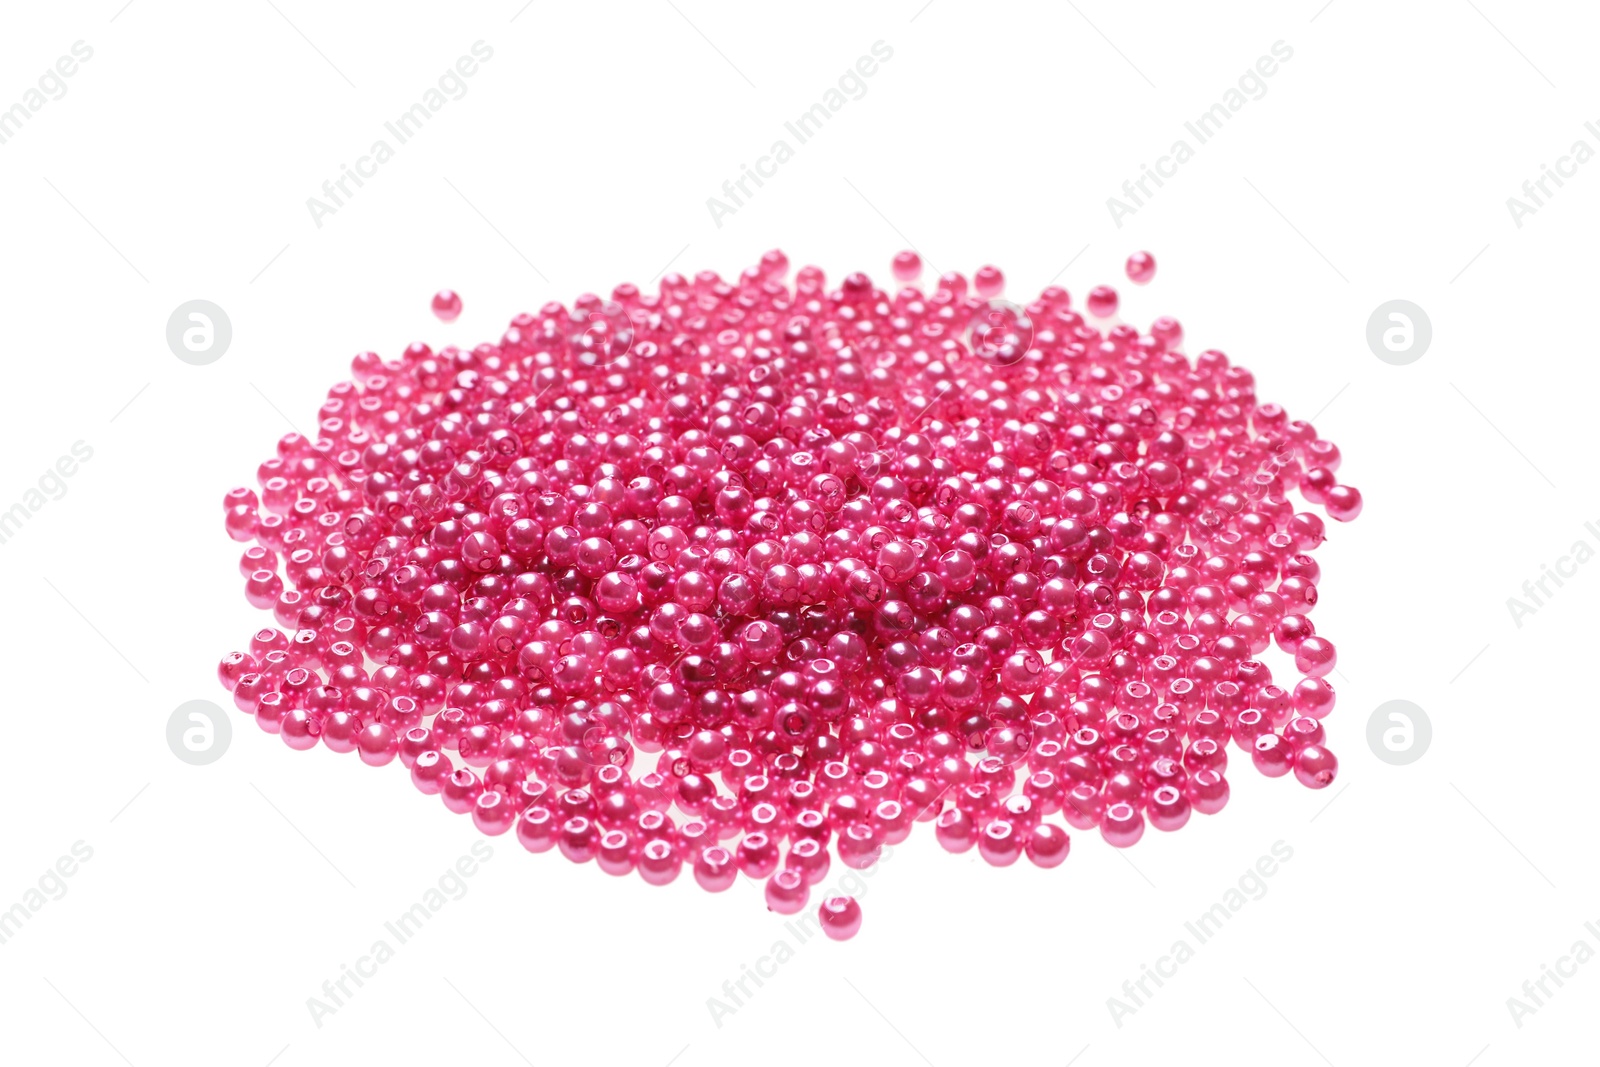 Photo of Pile of pink beads on white background